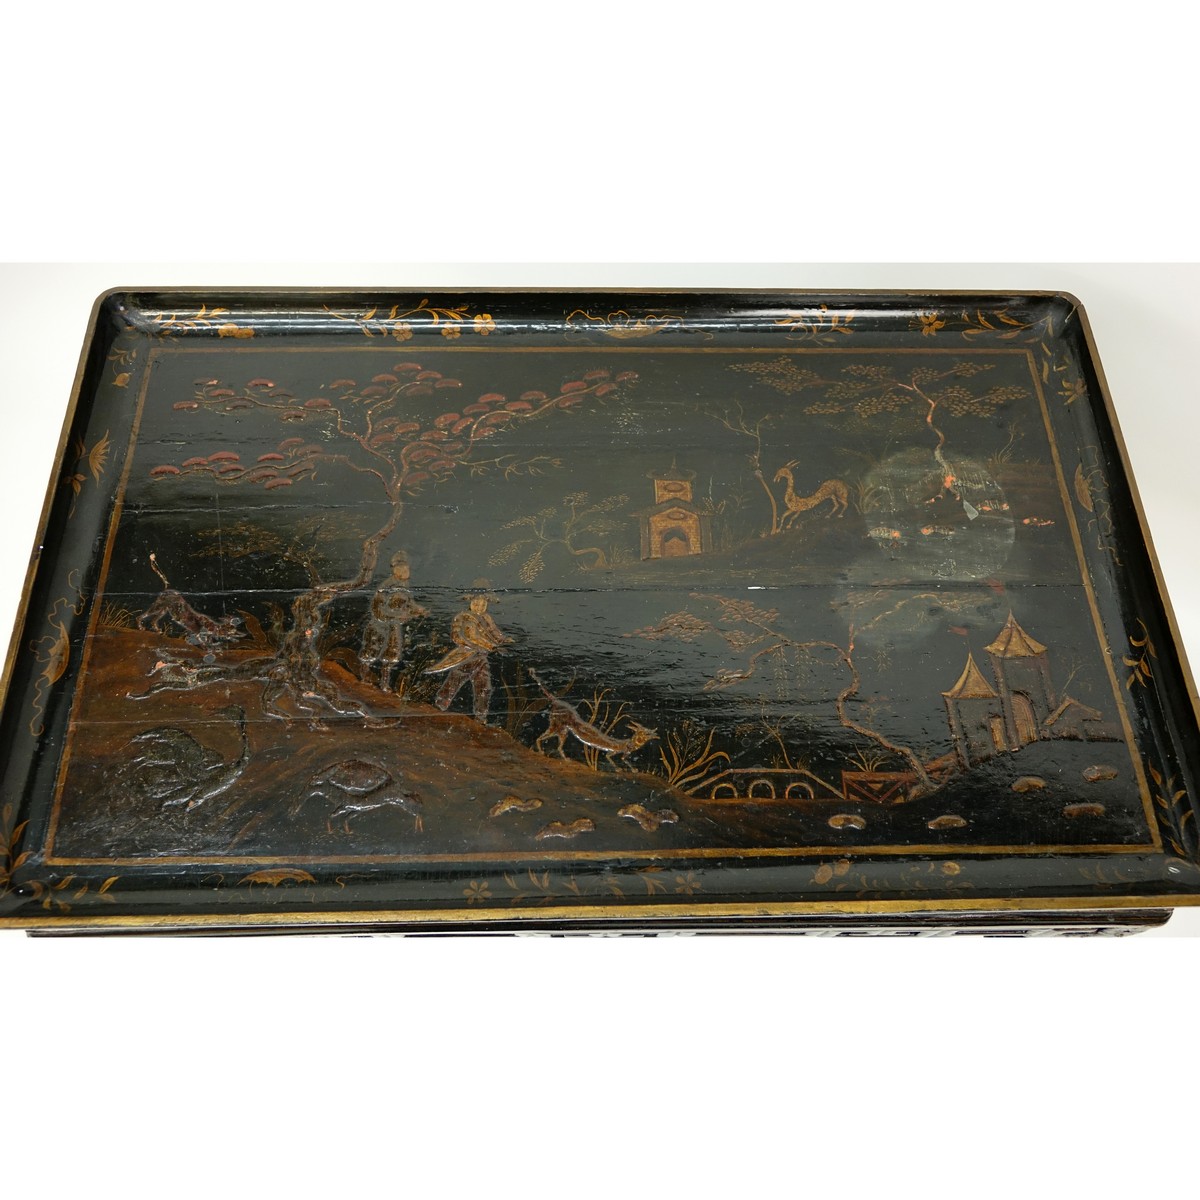 19th Century Chinese Export Lacquer Table with Open Fret Work Apron and Ball and Claw Feet. Landscape scene to top with figures.